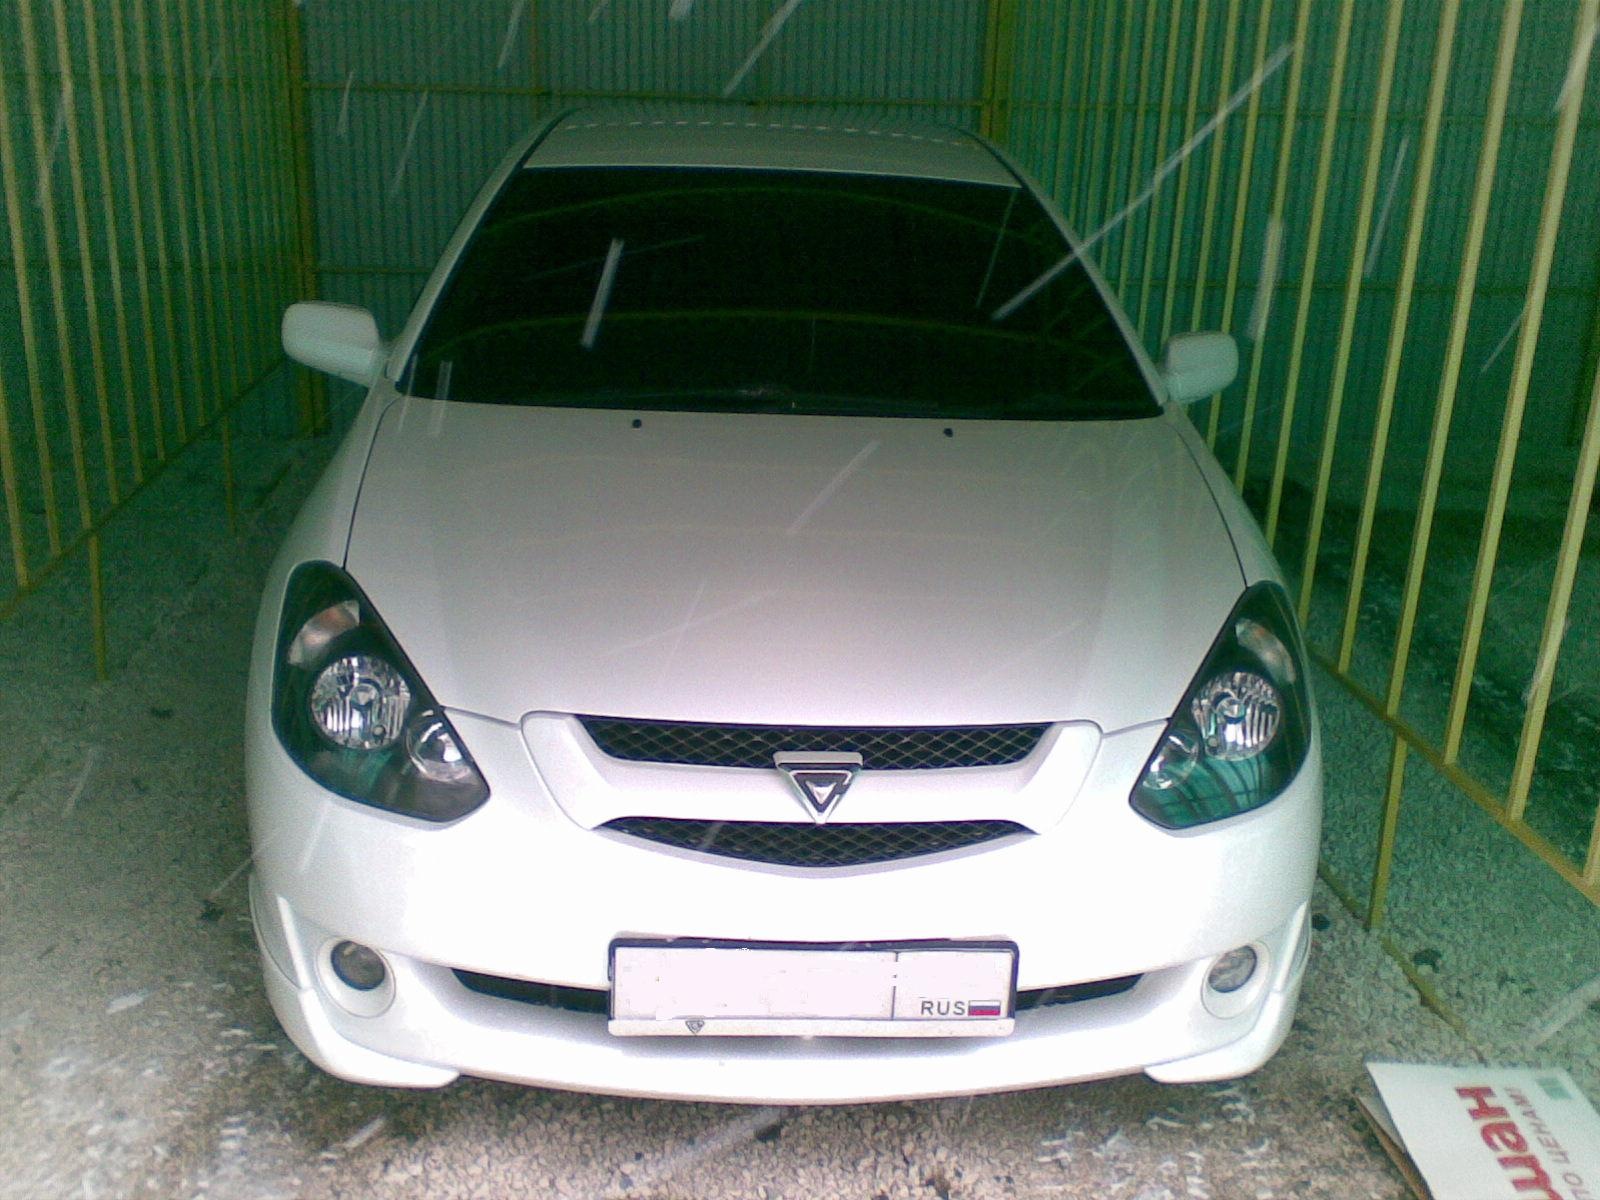 I repaired all the parts after the force majeure spring  - Toyota Caldina 20 L 2005